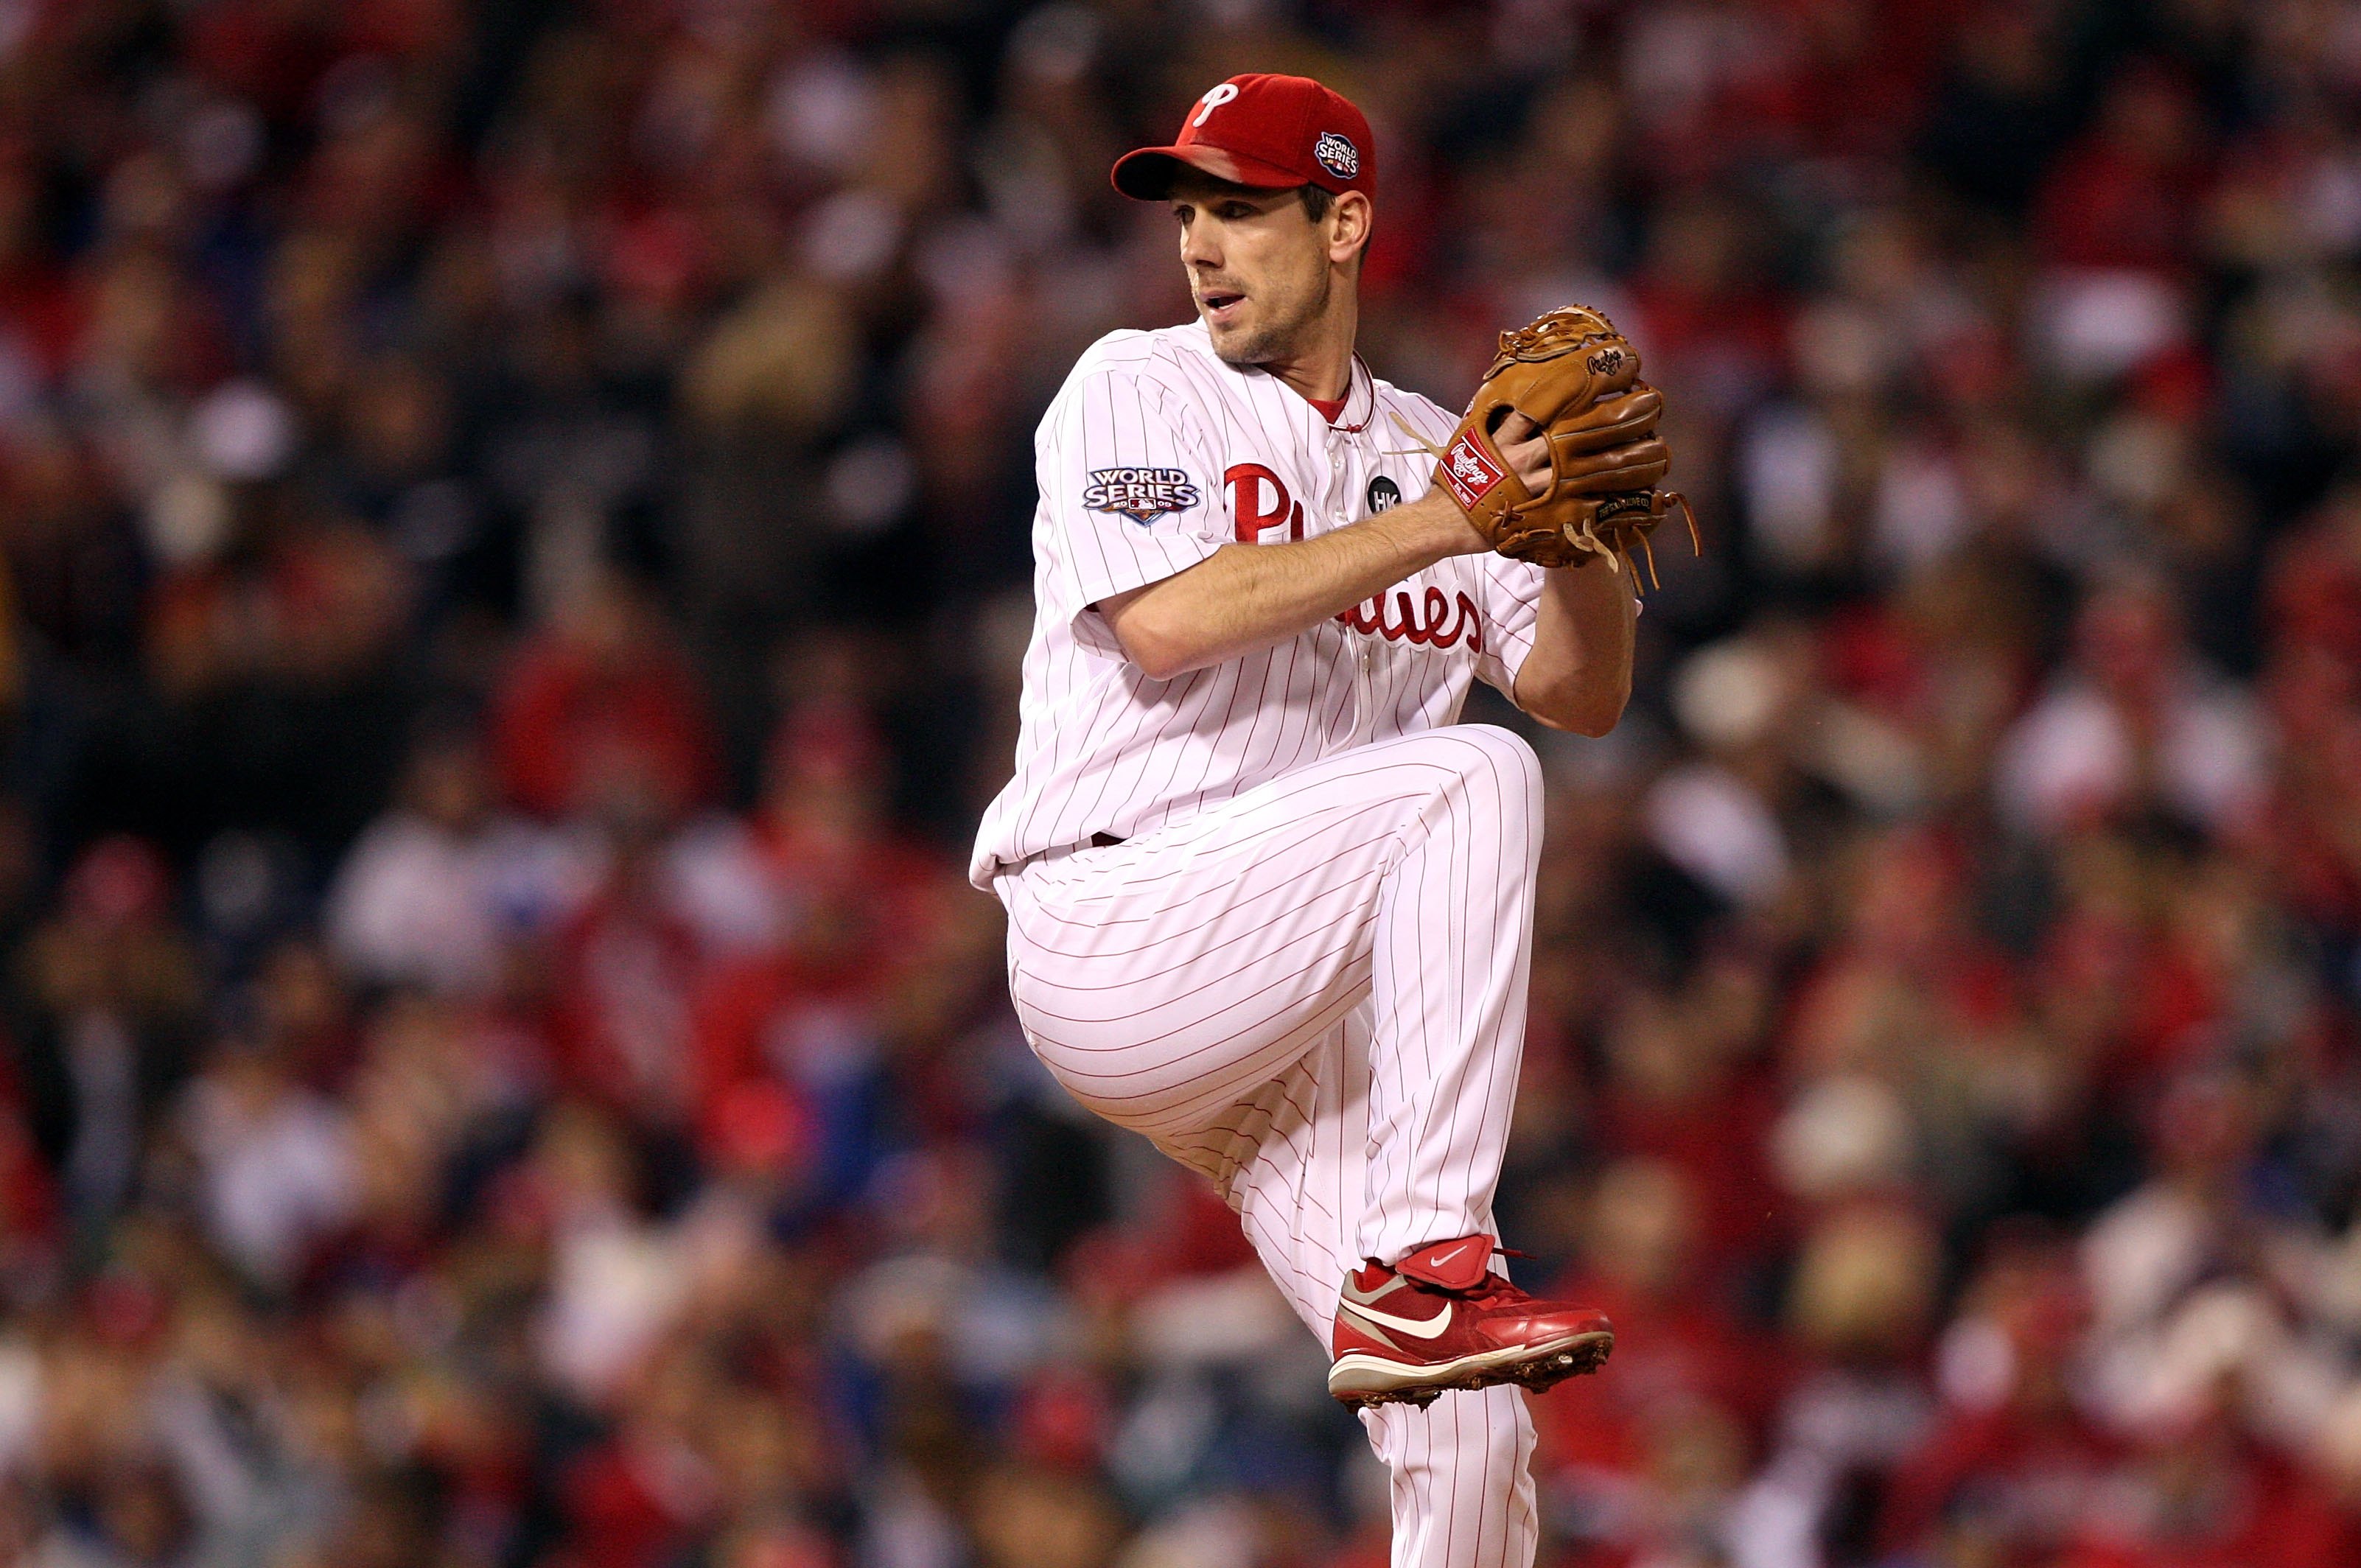 Phillies 2009 World Series Flashback: The Cliff Lee Game